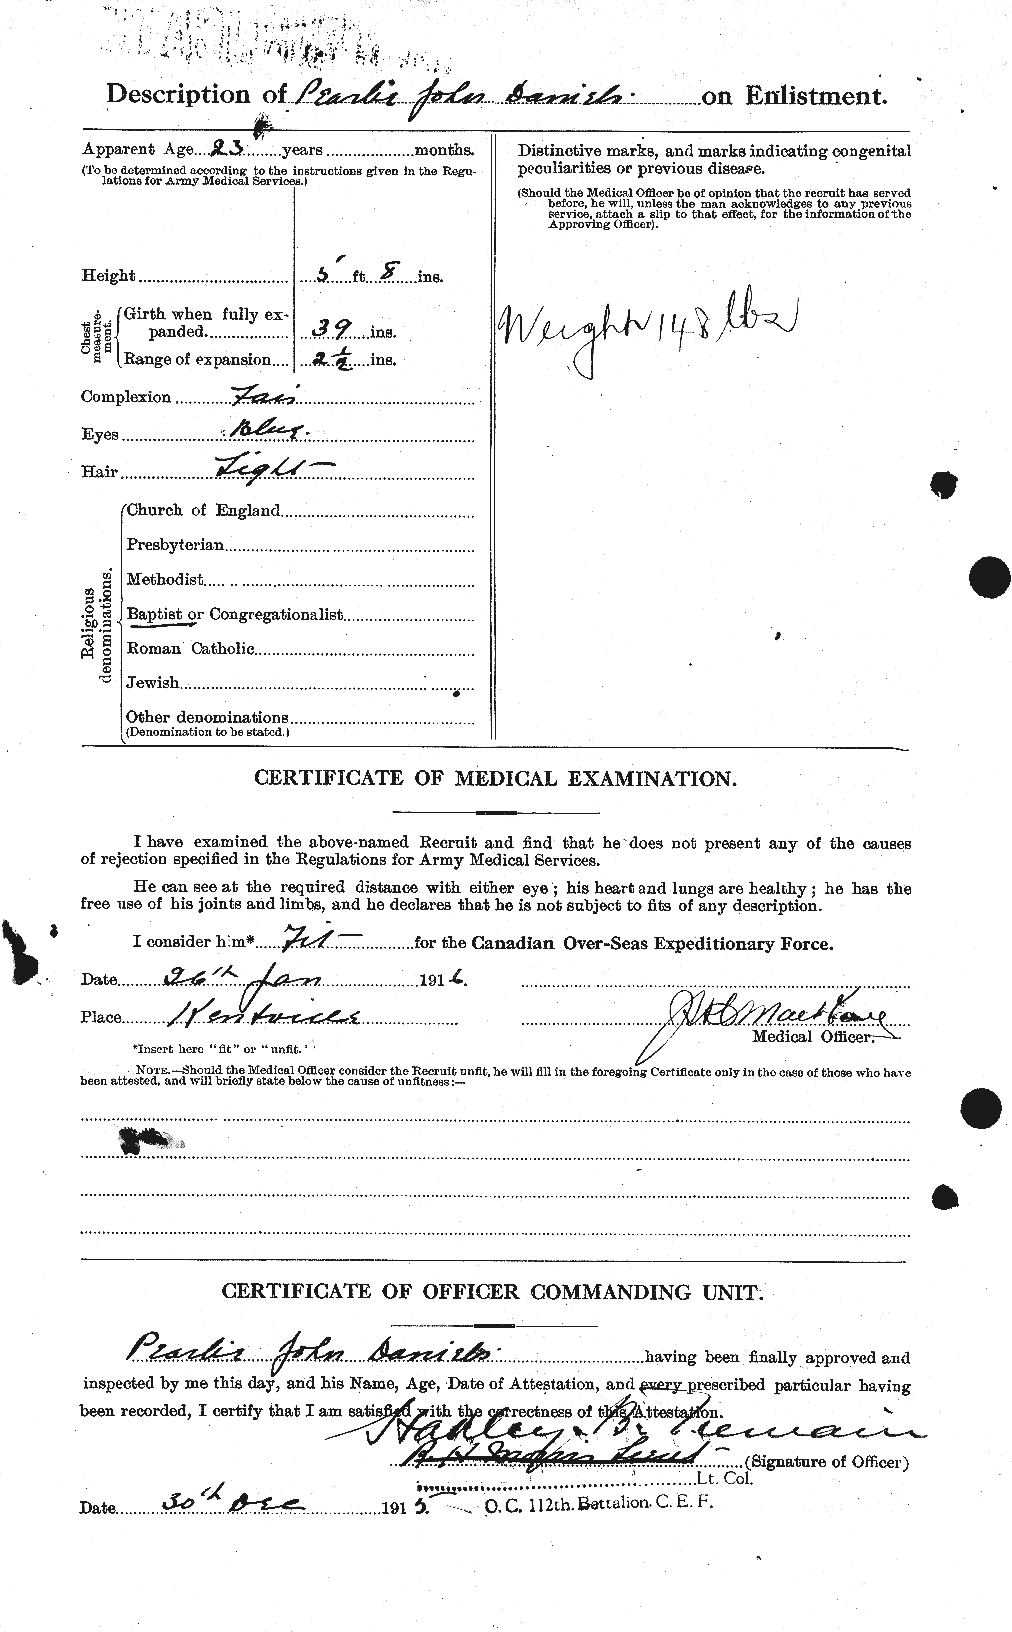 Personnel Records of the First World War - CEF 279659b